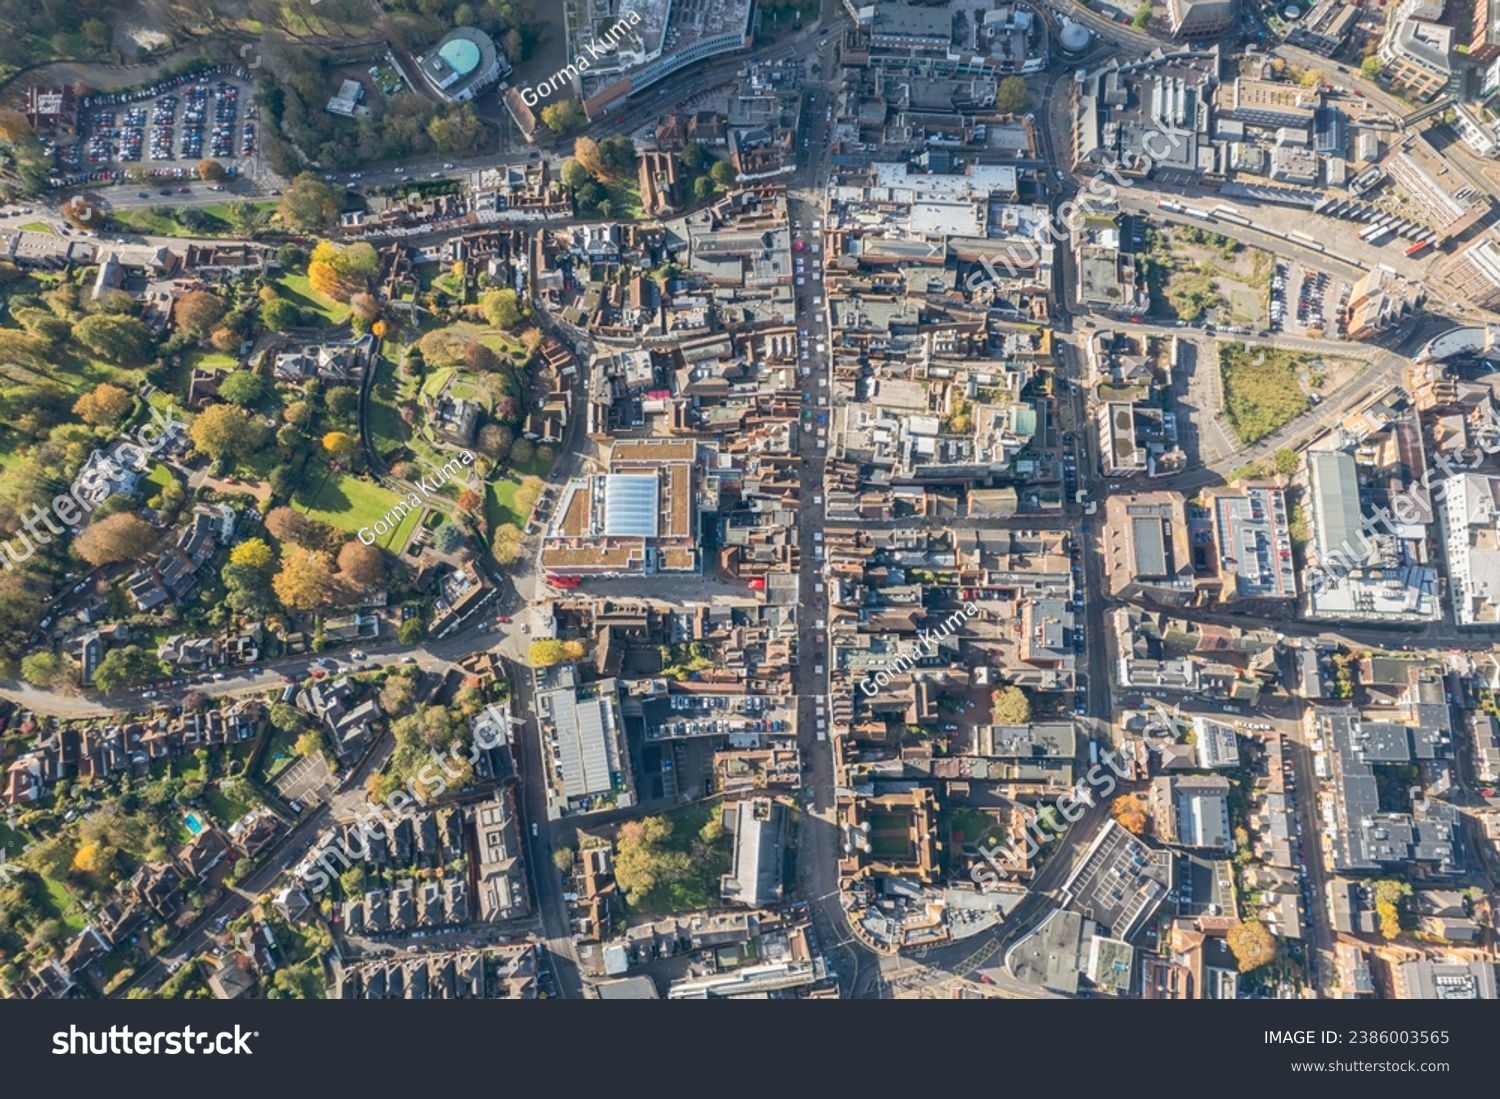 amazing aerial view of the downtown center high street of Guildford, Famous town near london, England, Autumn daytime #2386003565